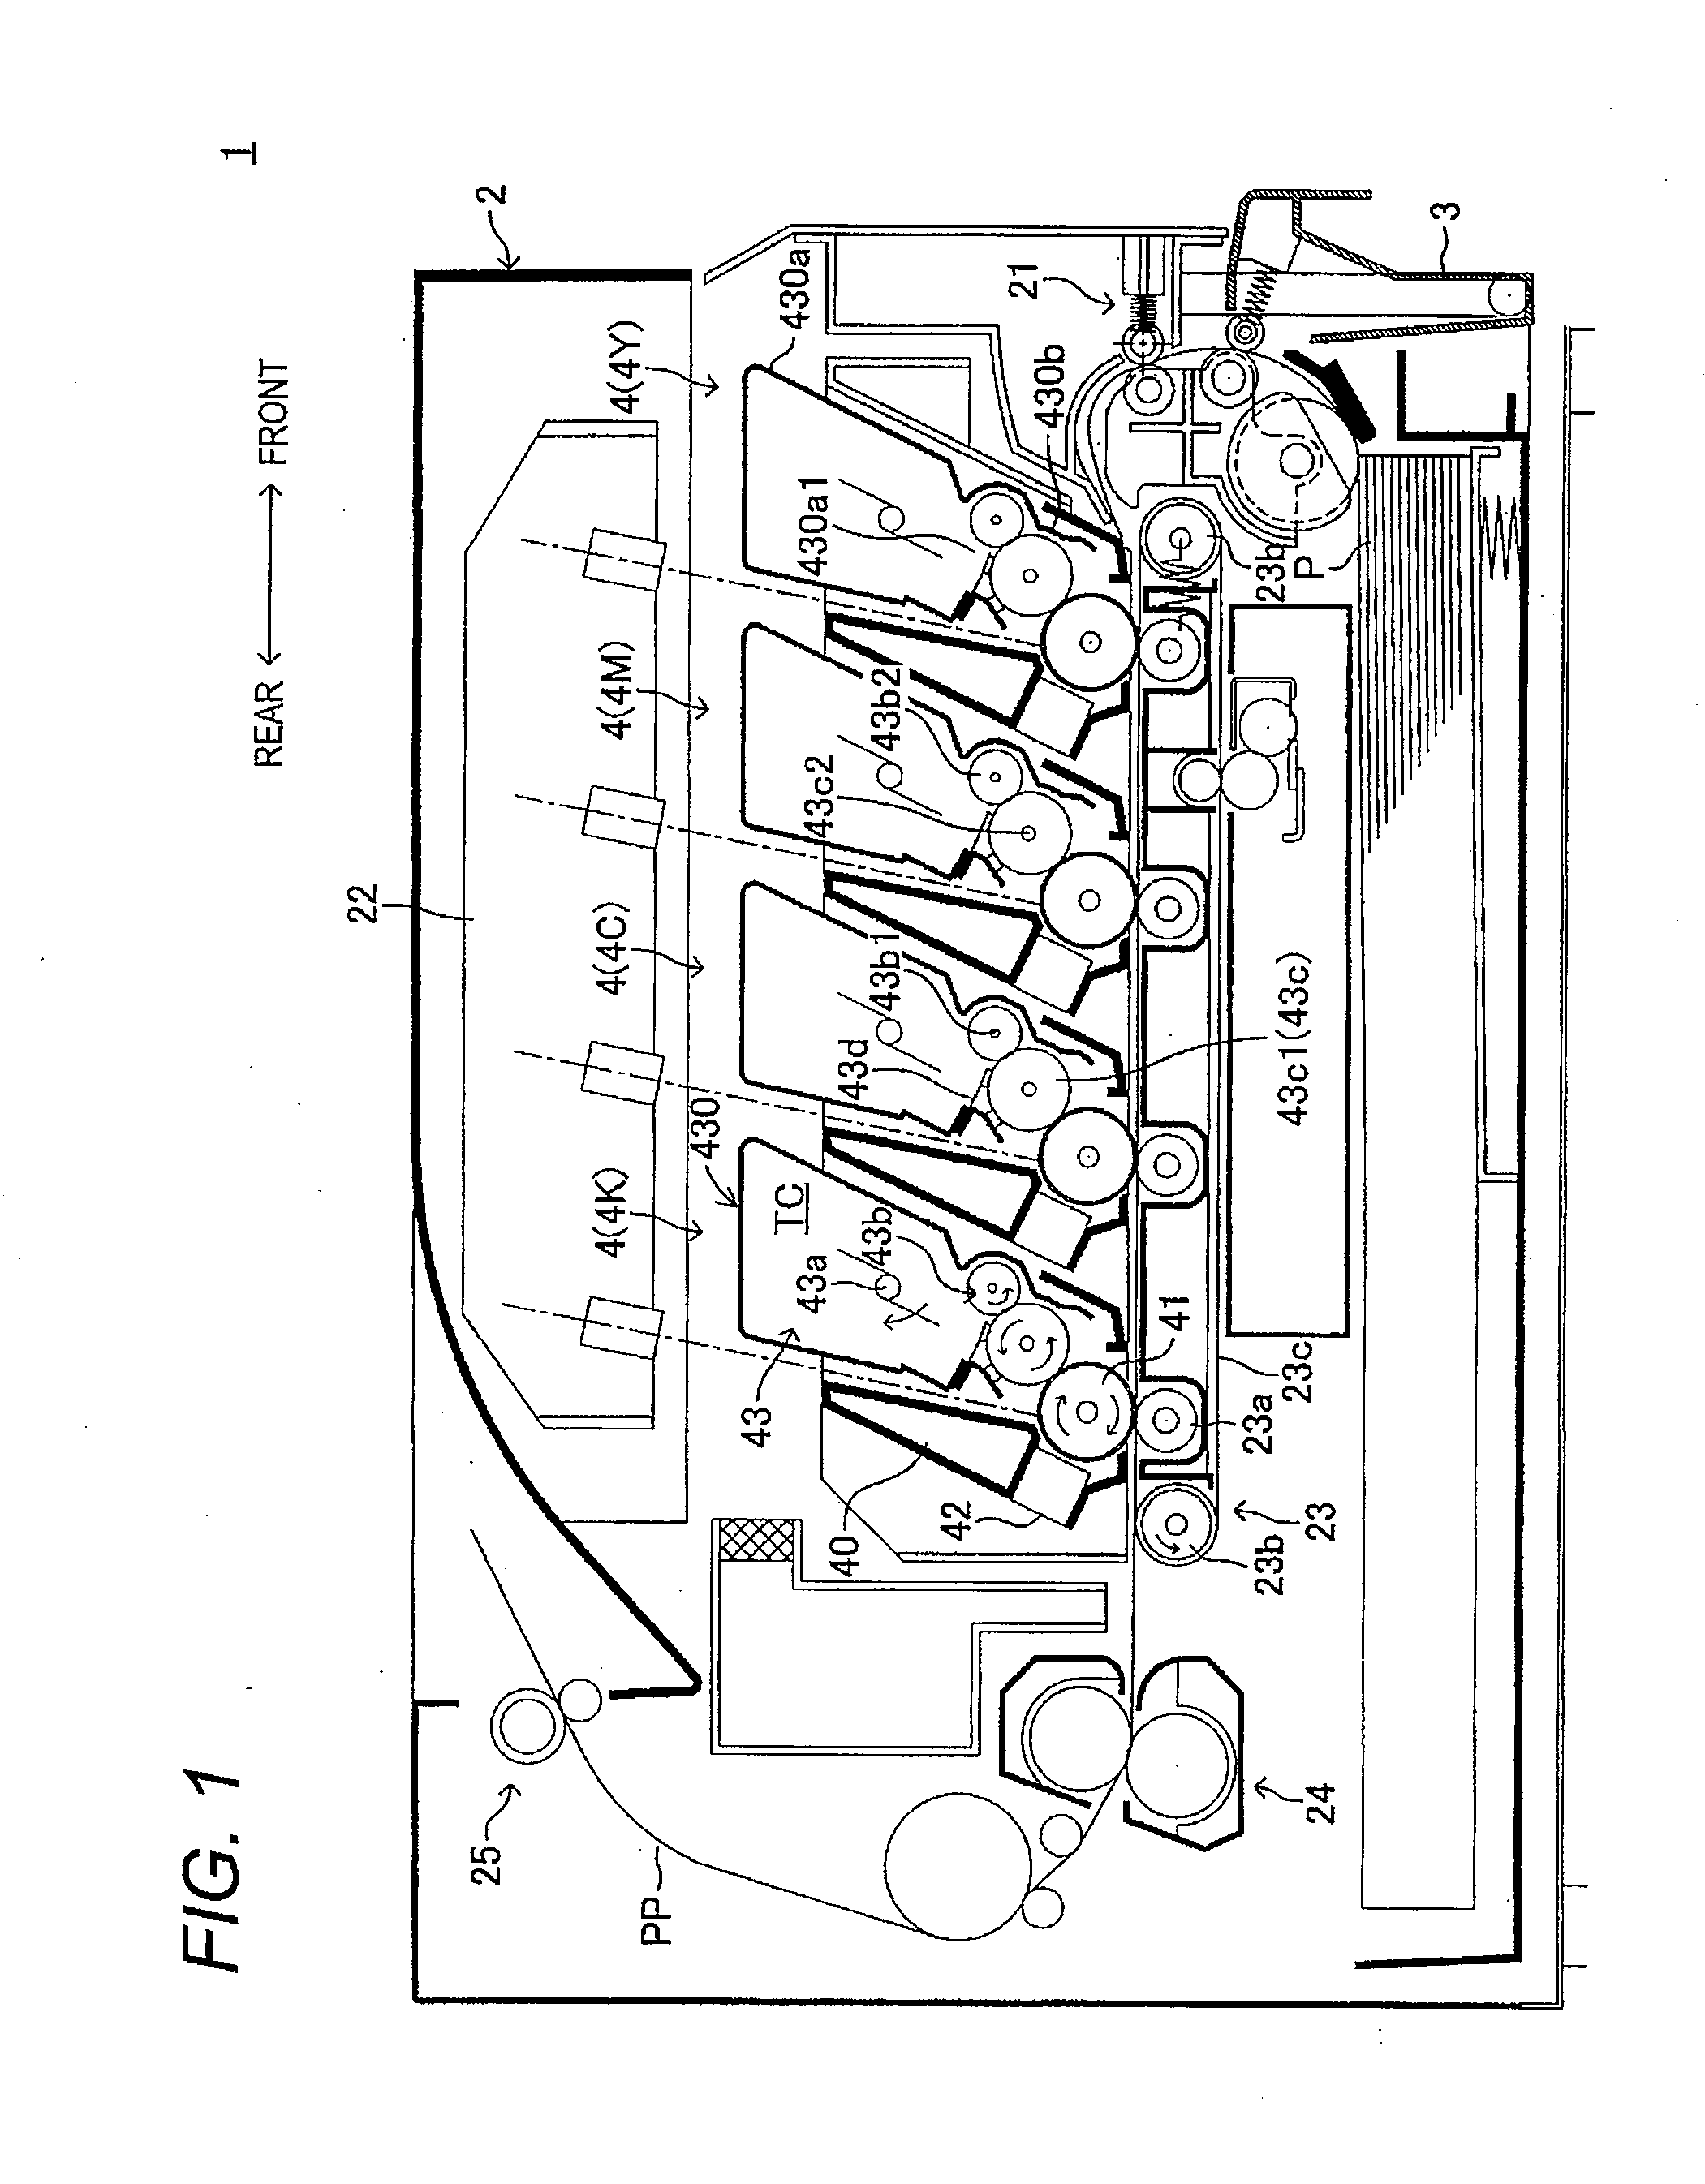 Casing Projections of an Image Forming Apparatus Configured to Support a Seal of a Developing Device